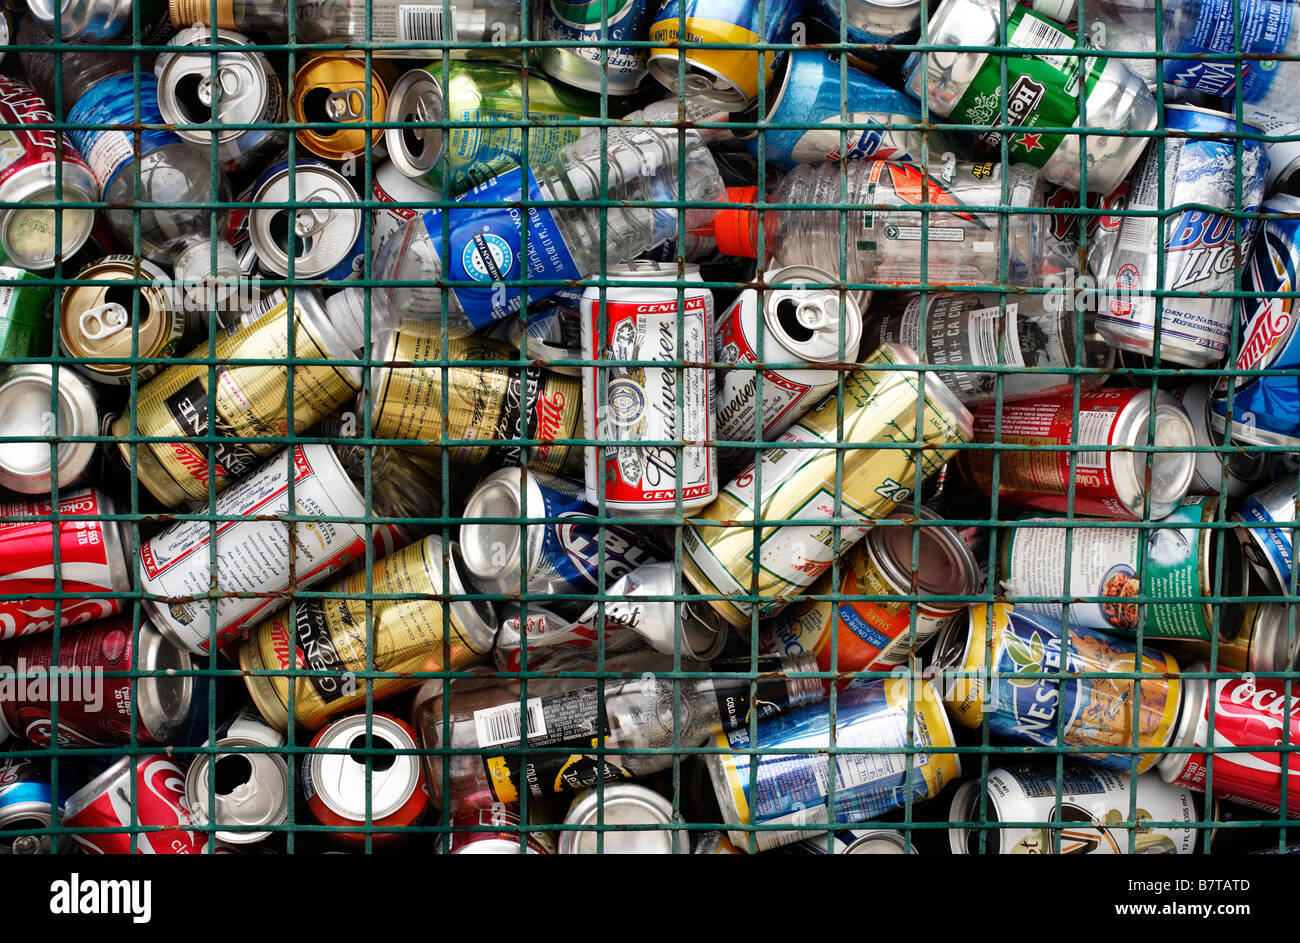 A large number of aluminum cans and plastic bottles destined for recycling in a wire mesh container. Stock Photo